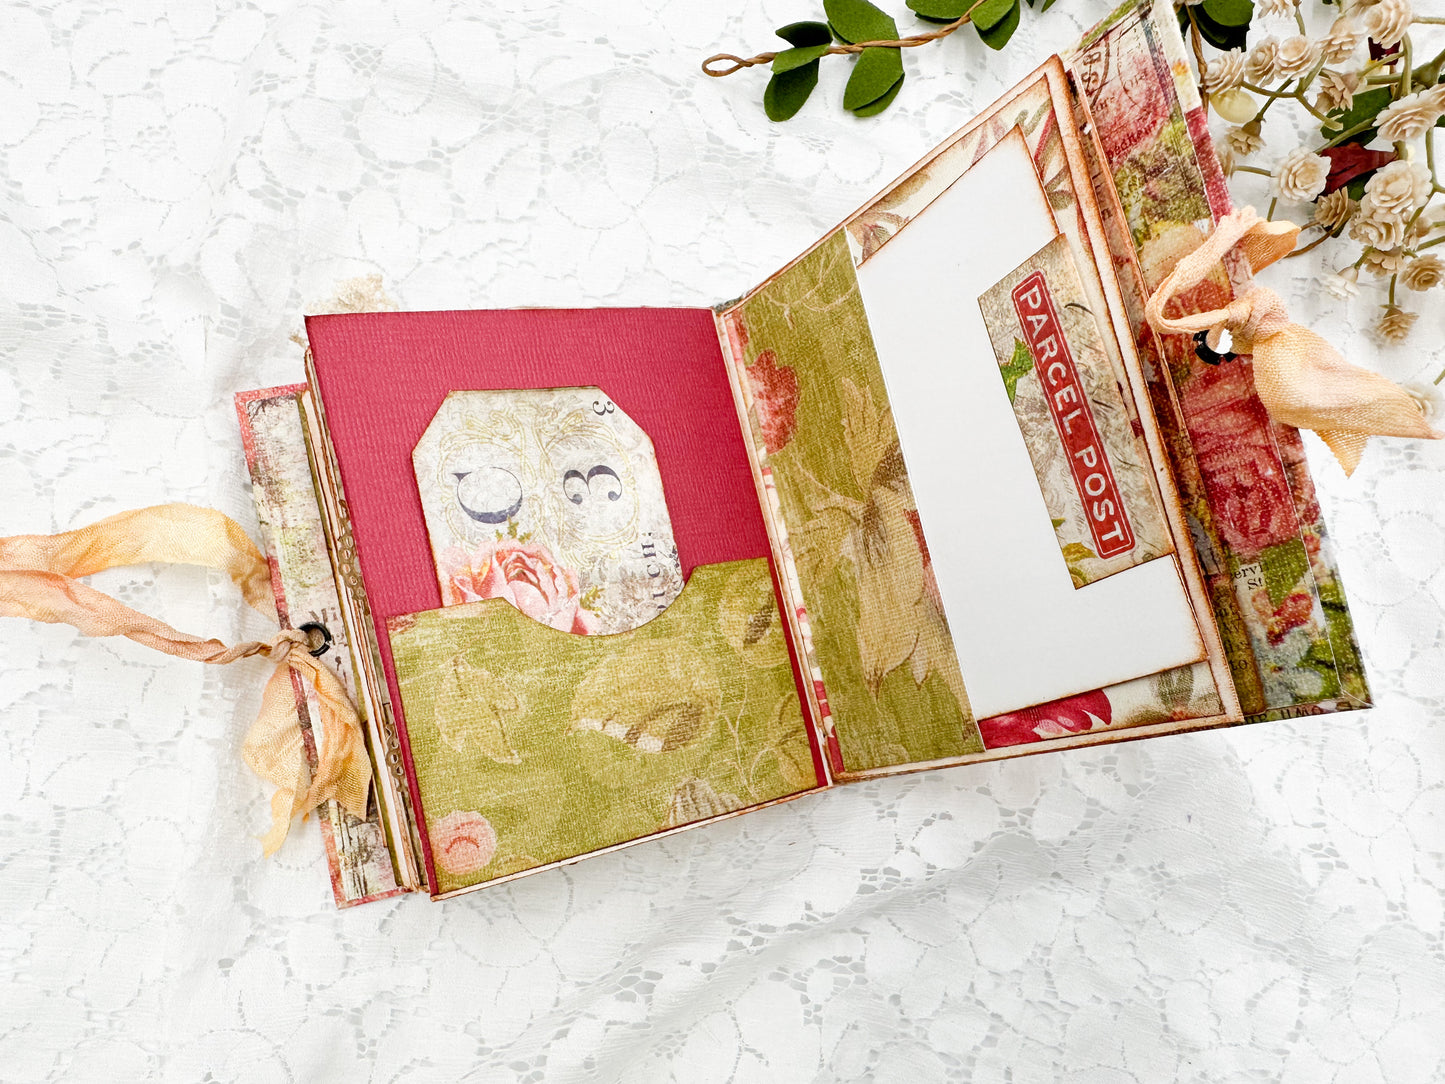 Floral Journal by Becky Meldrum